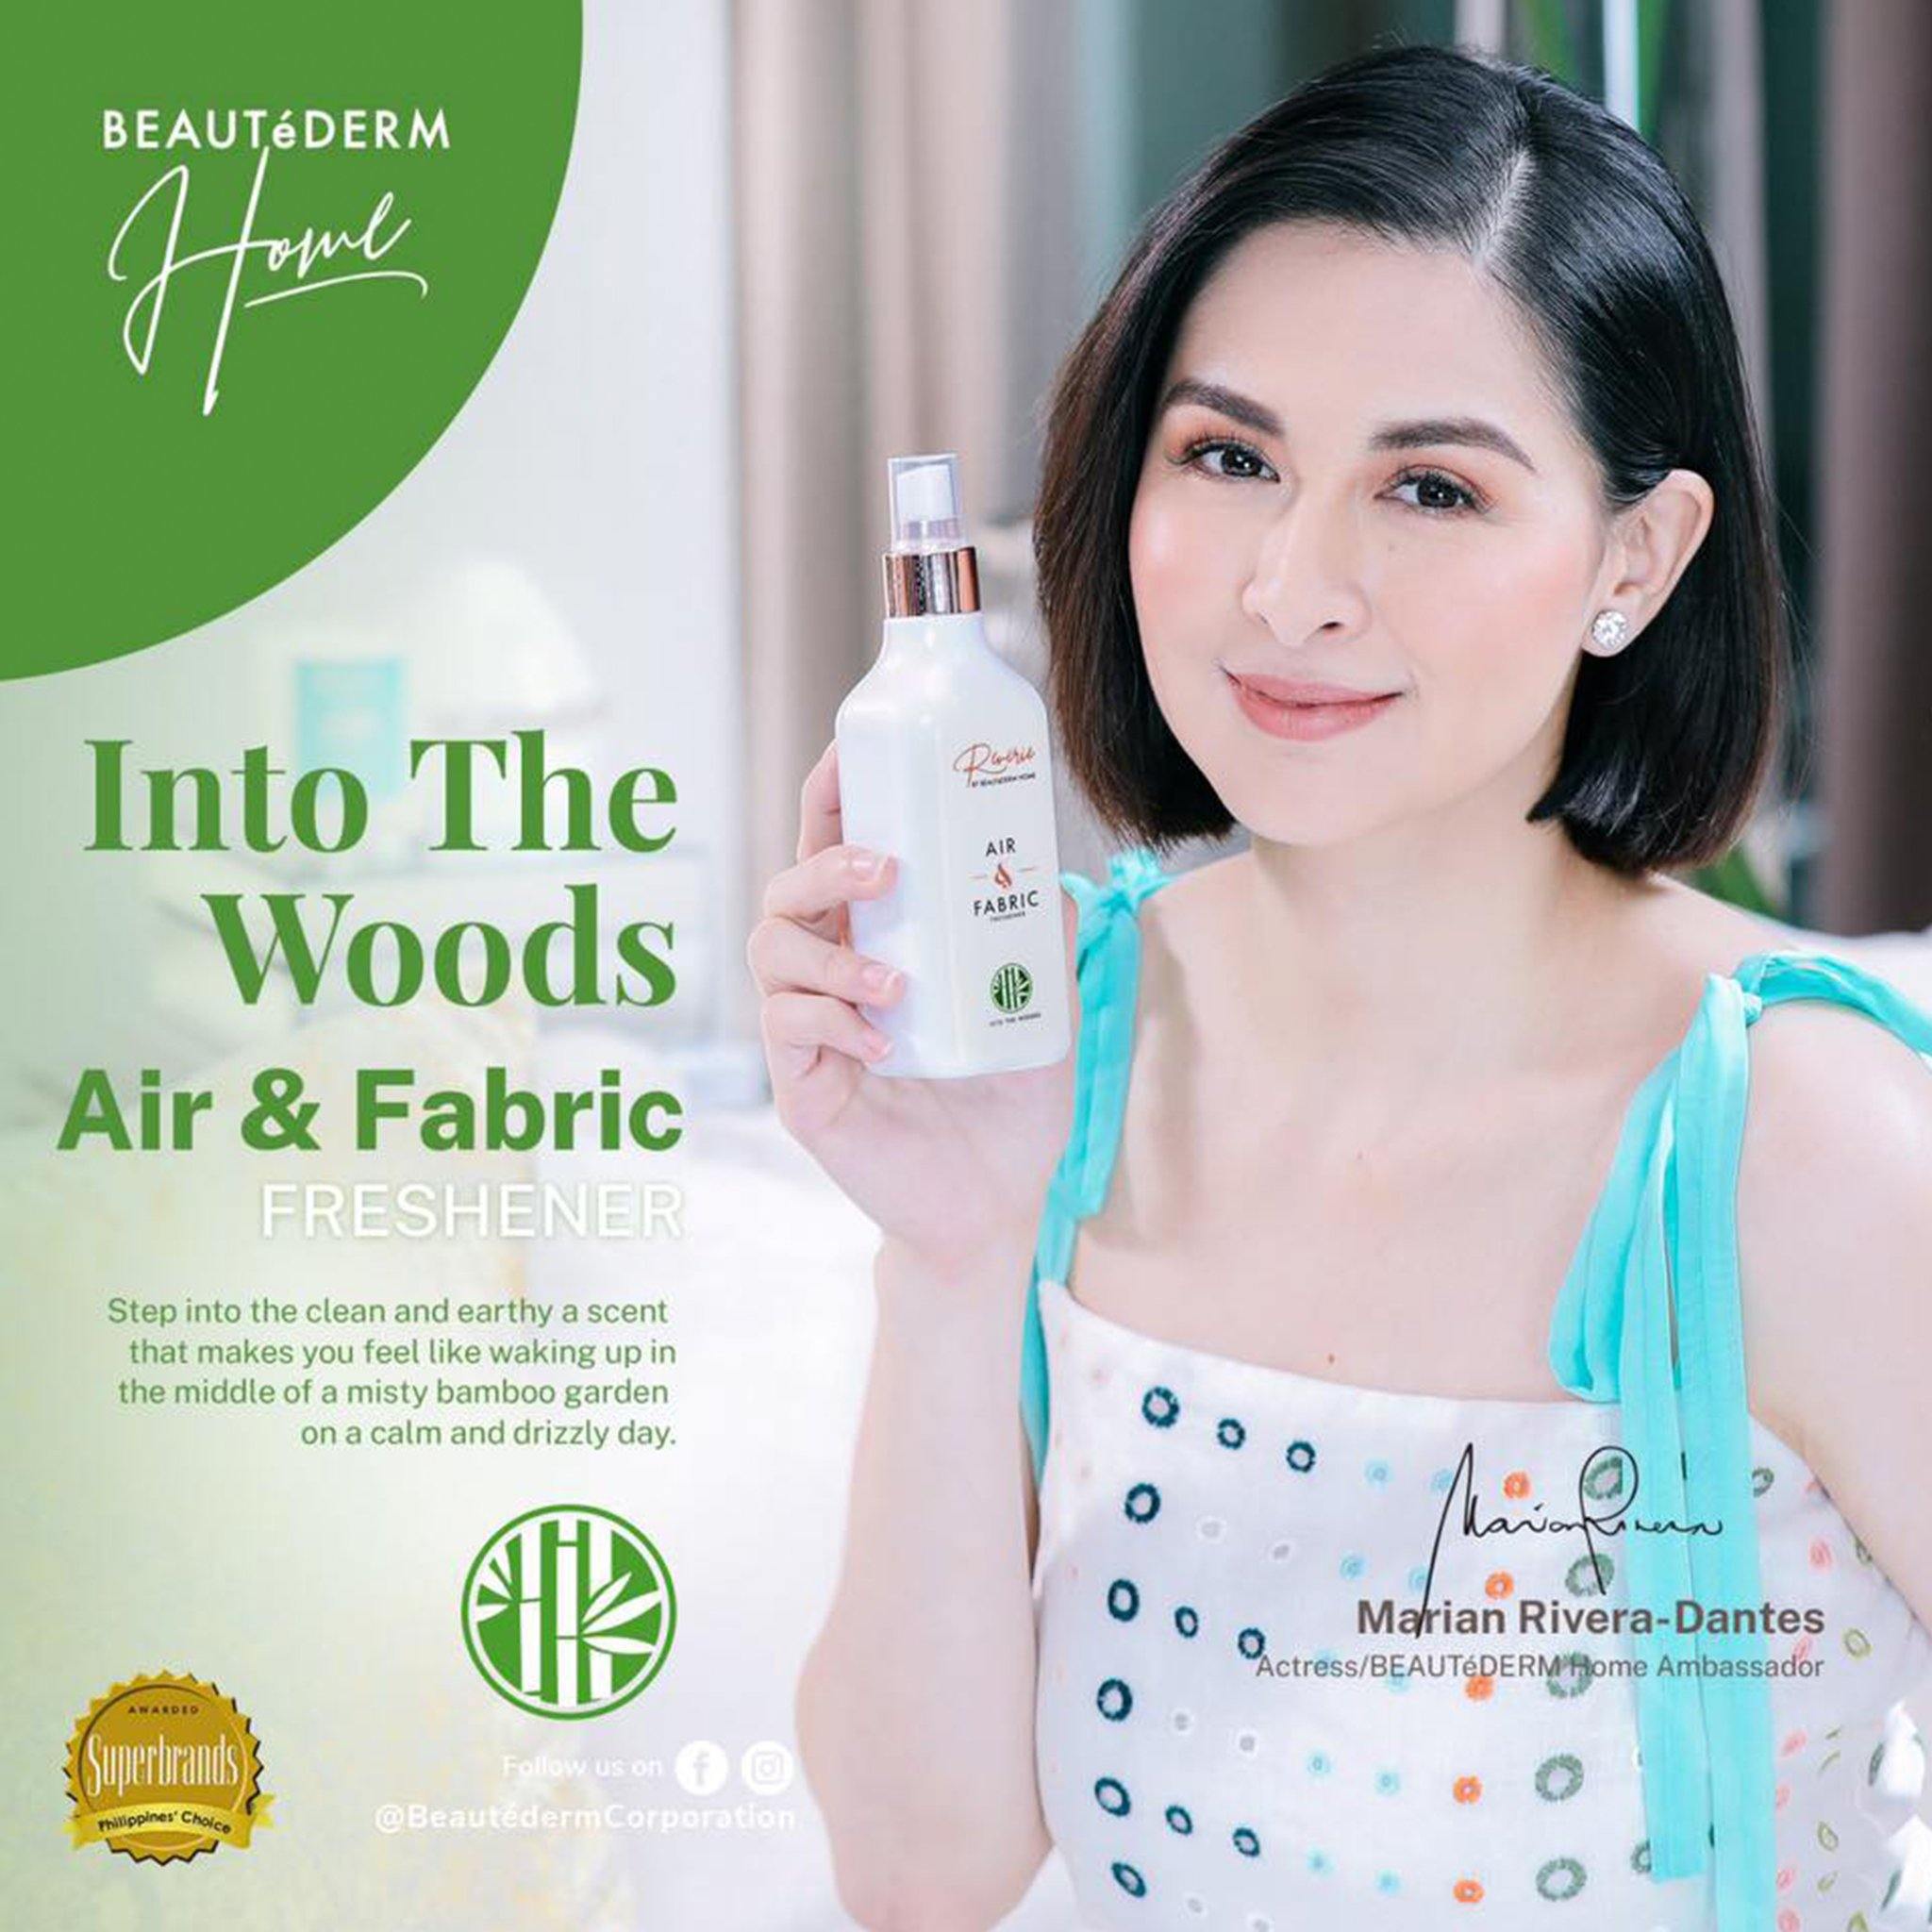 Air & Fabric Freshener, Into The Woods (Bamboo Scent), 250ml, Reverie by Beautederm Home, with Marian Rivera-Dantes (Beautederm Home Ambassador)